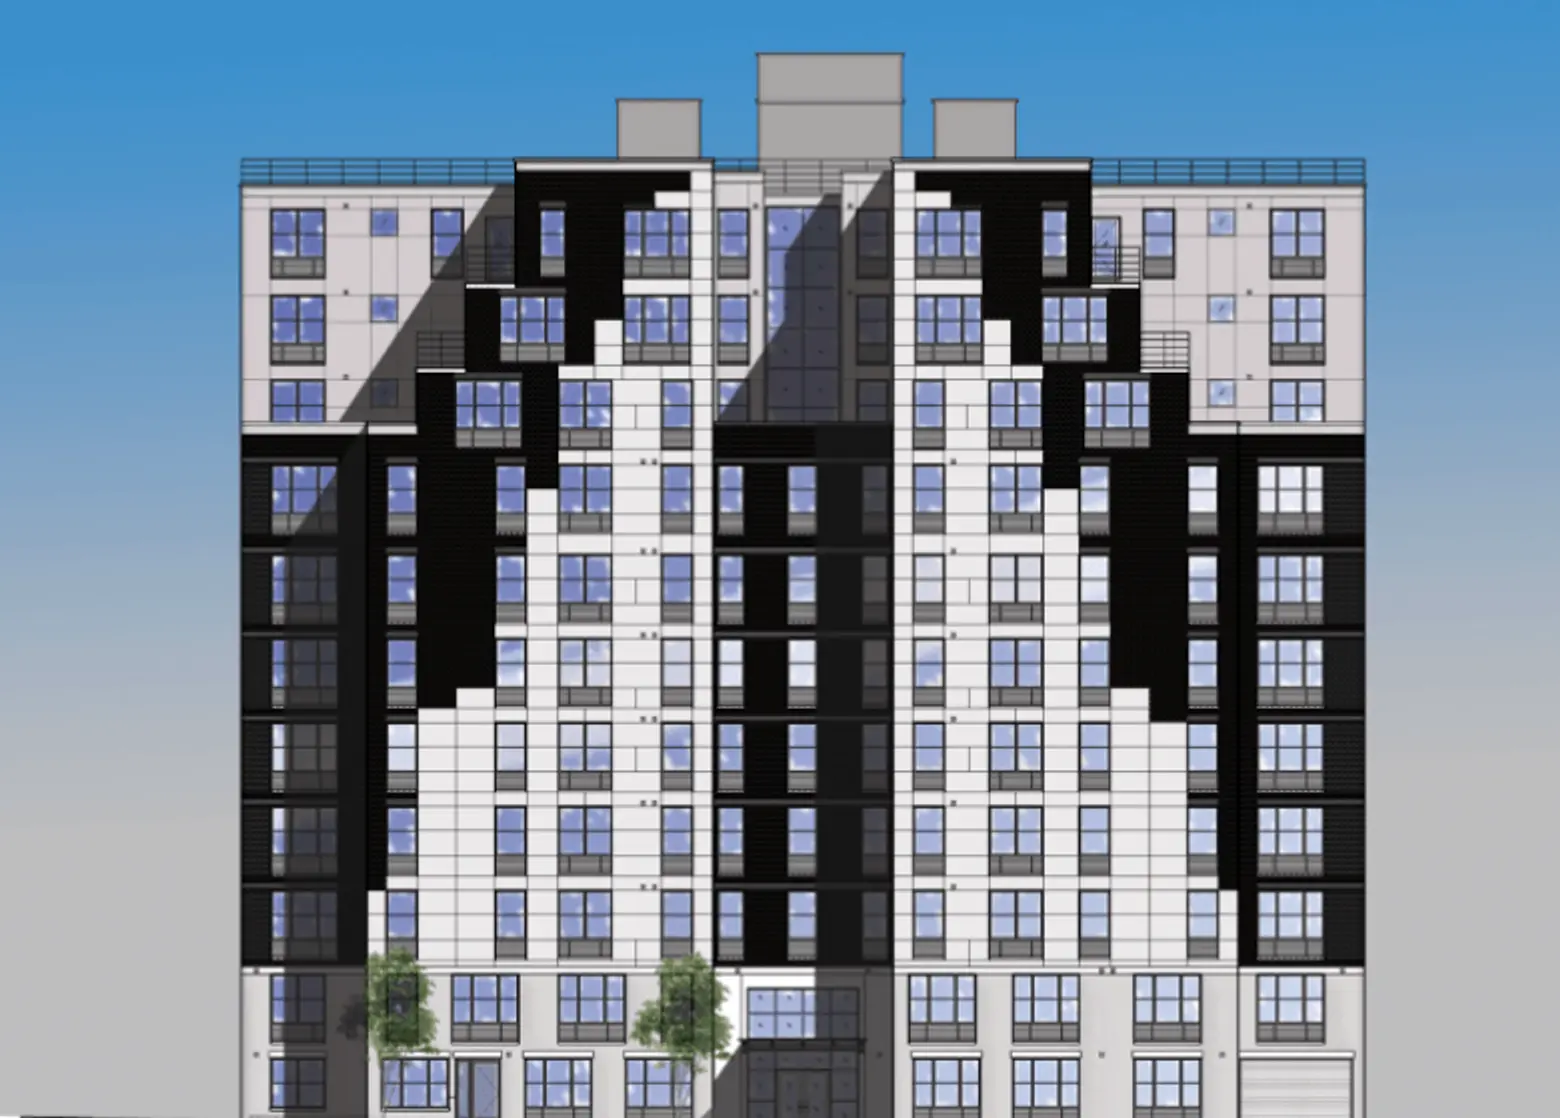 62 affordable units up for grabs in Fordham Heights, from $882/month